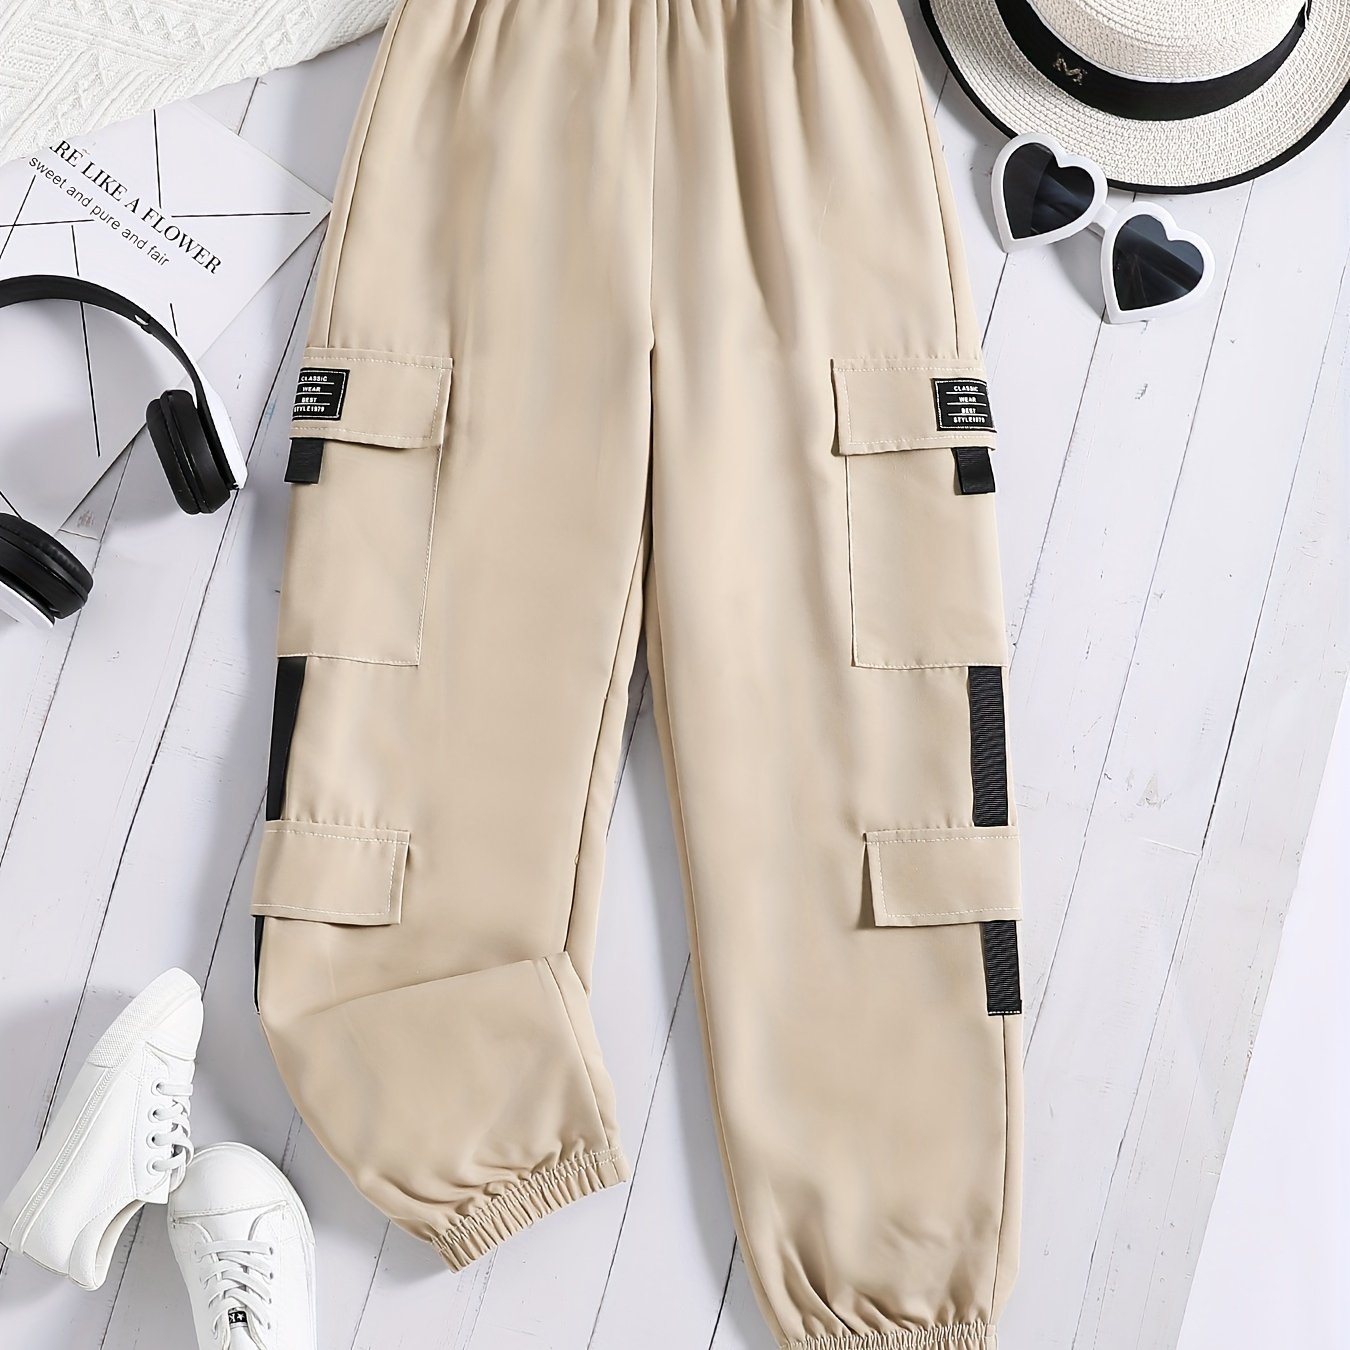 girls street style multi pocket casual sports cargo pants trousers